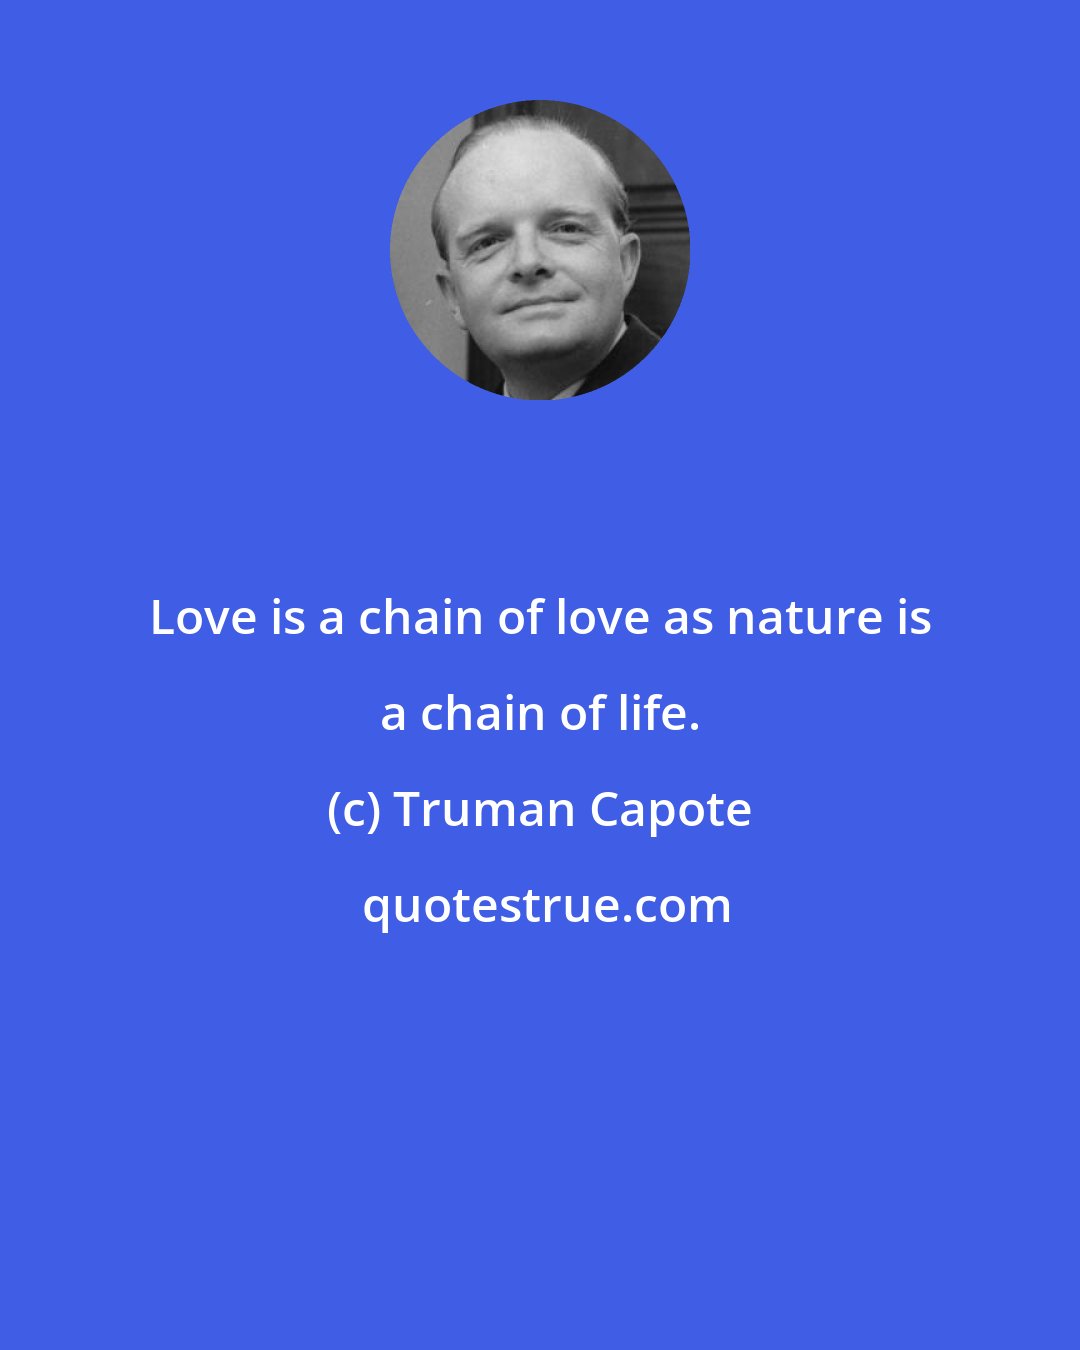 Truman Capote: Love is a chain of love as nature is a chain of life.